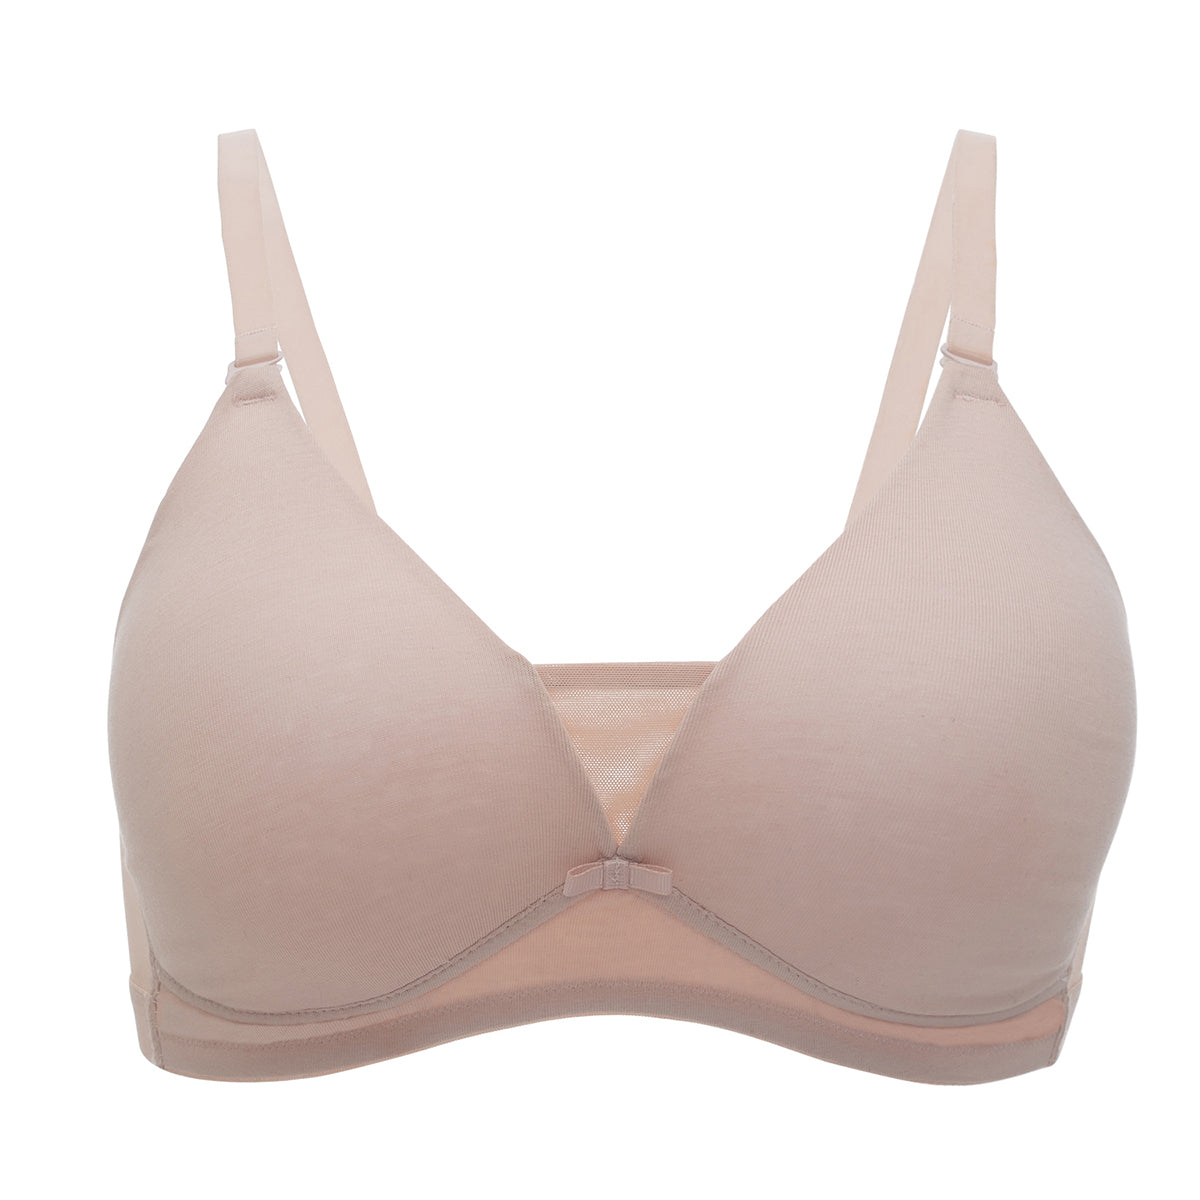 Breathe Cotton Padded wireless Triangle T-shirt bra 3/4th coverage - Nude NYB003